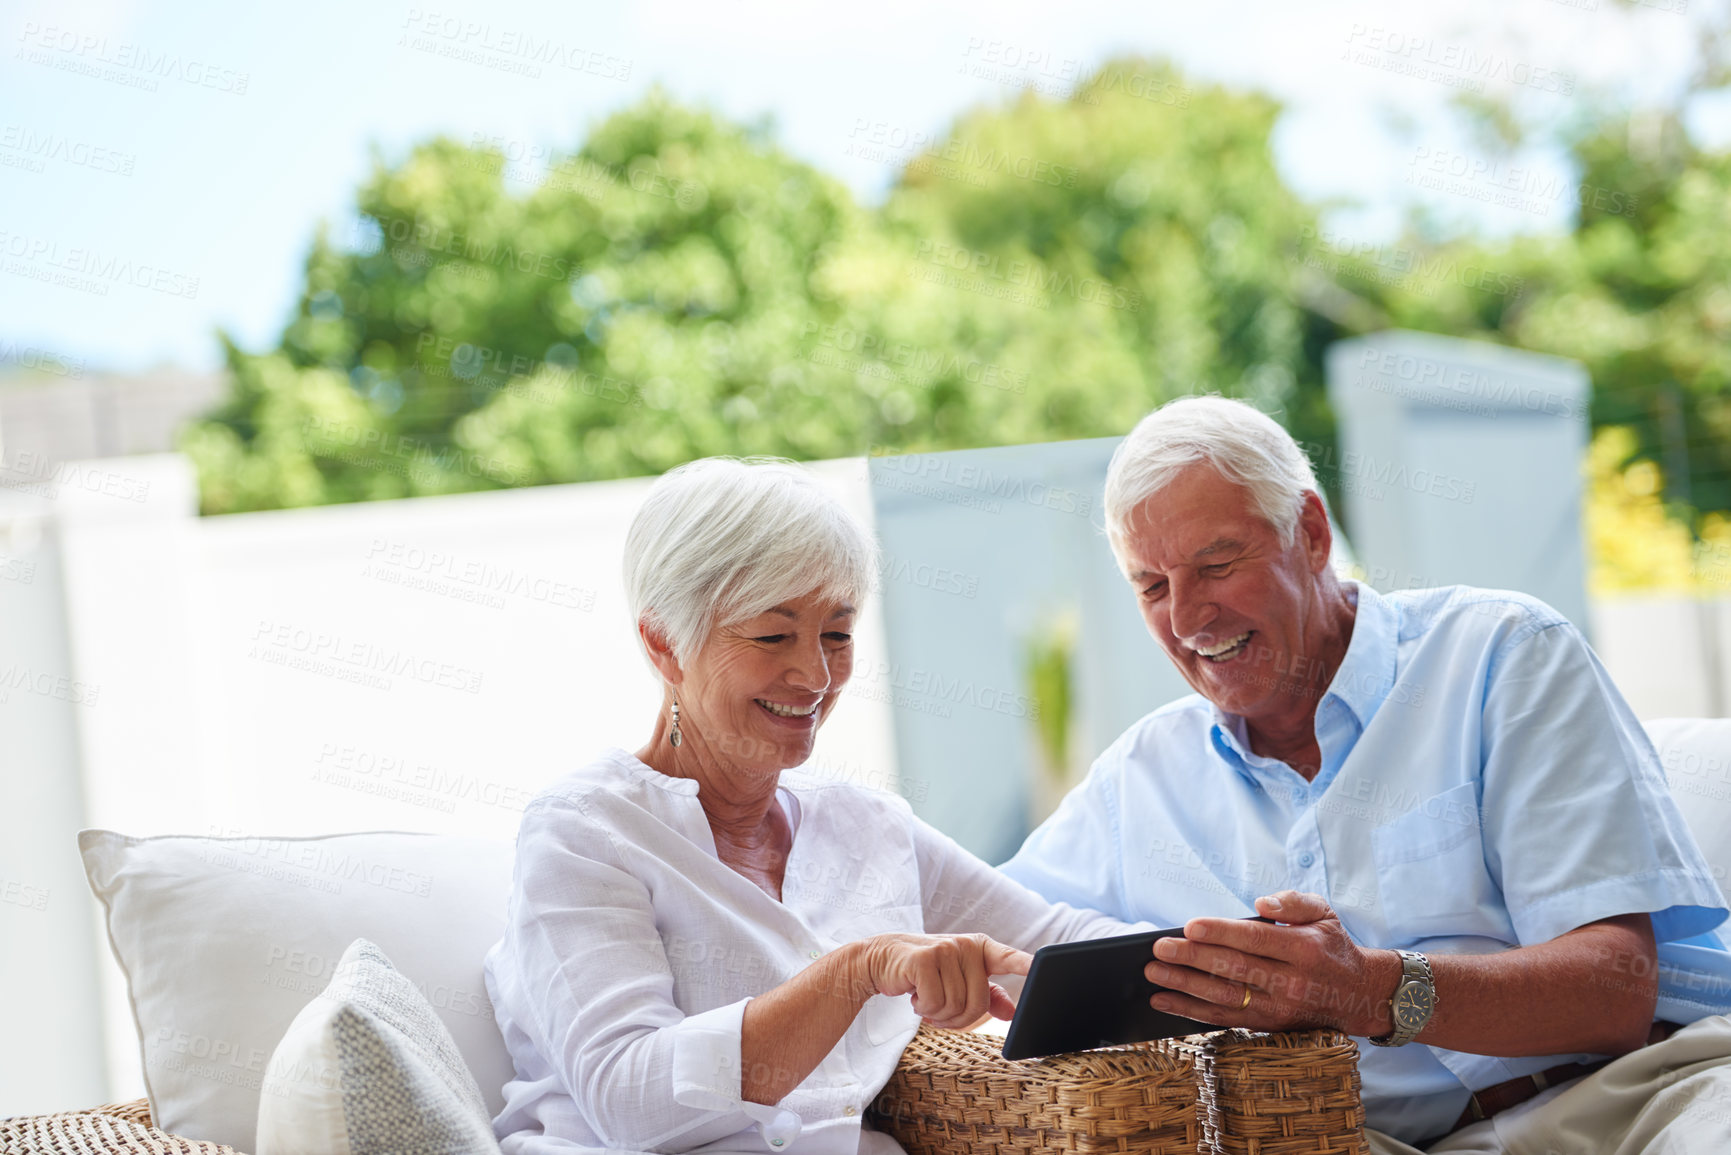 Buy stock photo Shot of a senior couple using a tablet while sitting on their patio9